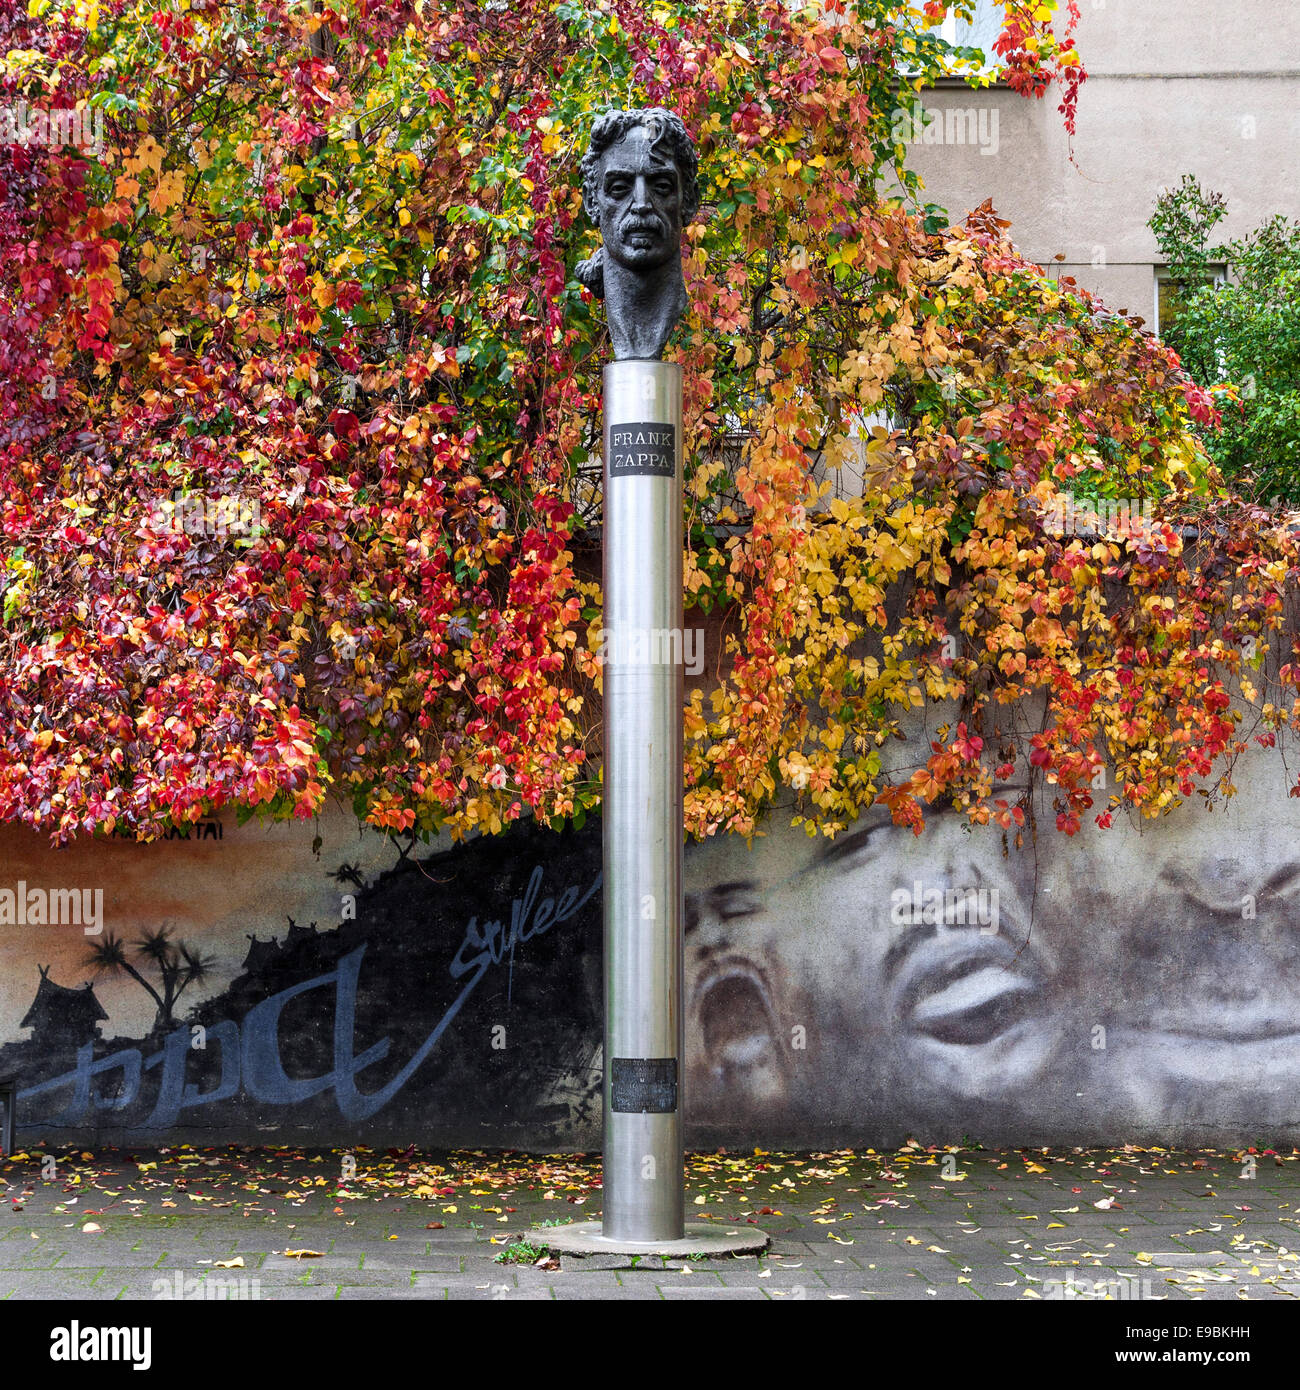 Monument dedicated to Frank Zappa in Vilnius, Lithuania. Monument is placed against graffiti wall with autumn foliage Stock Photo